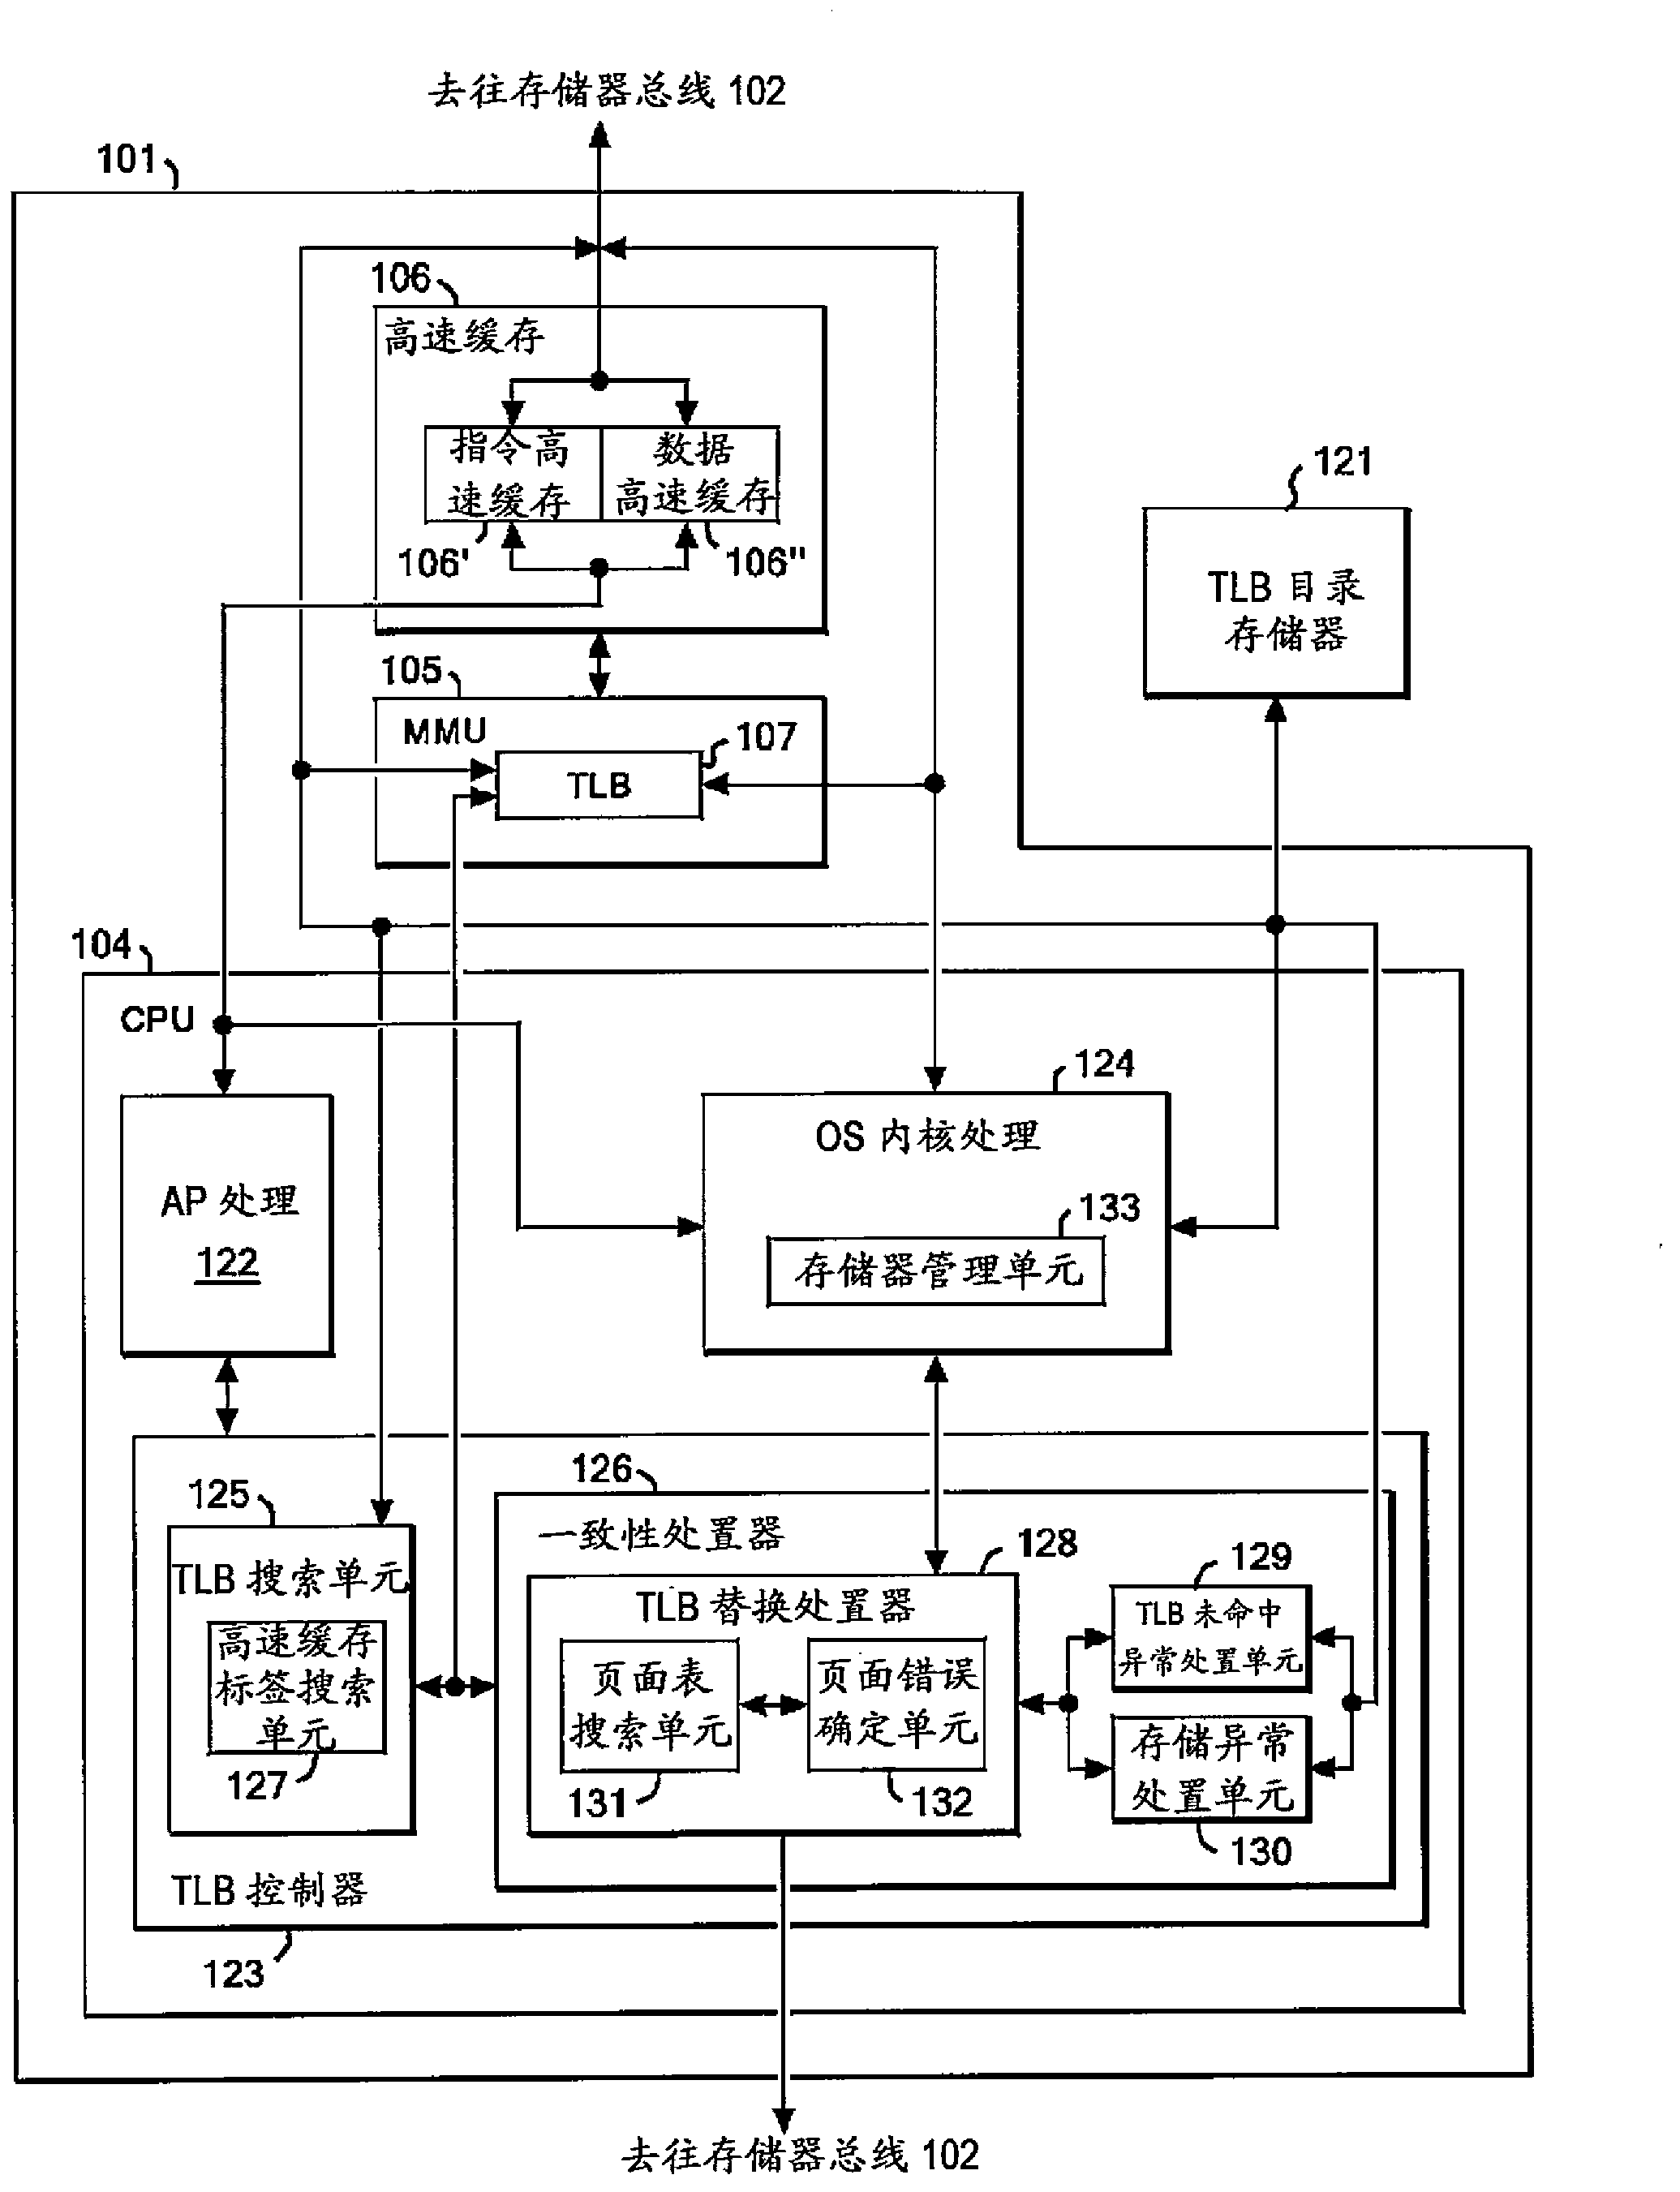 Method, system, and program for cache coherency control